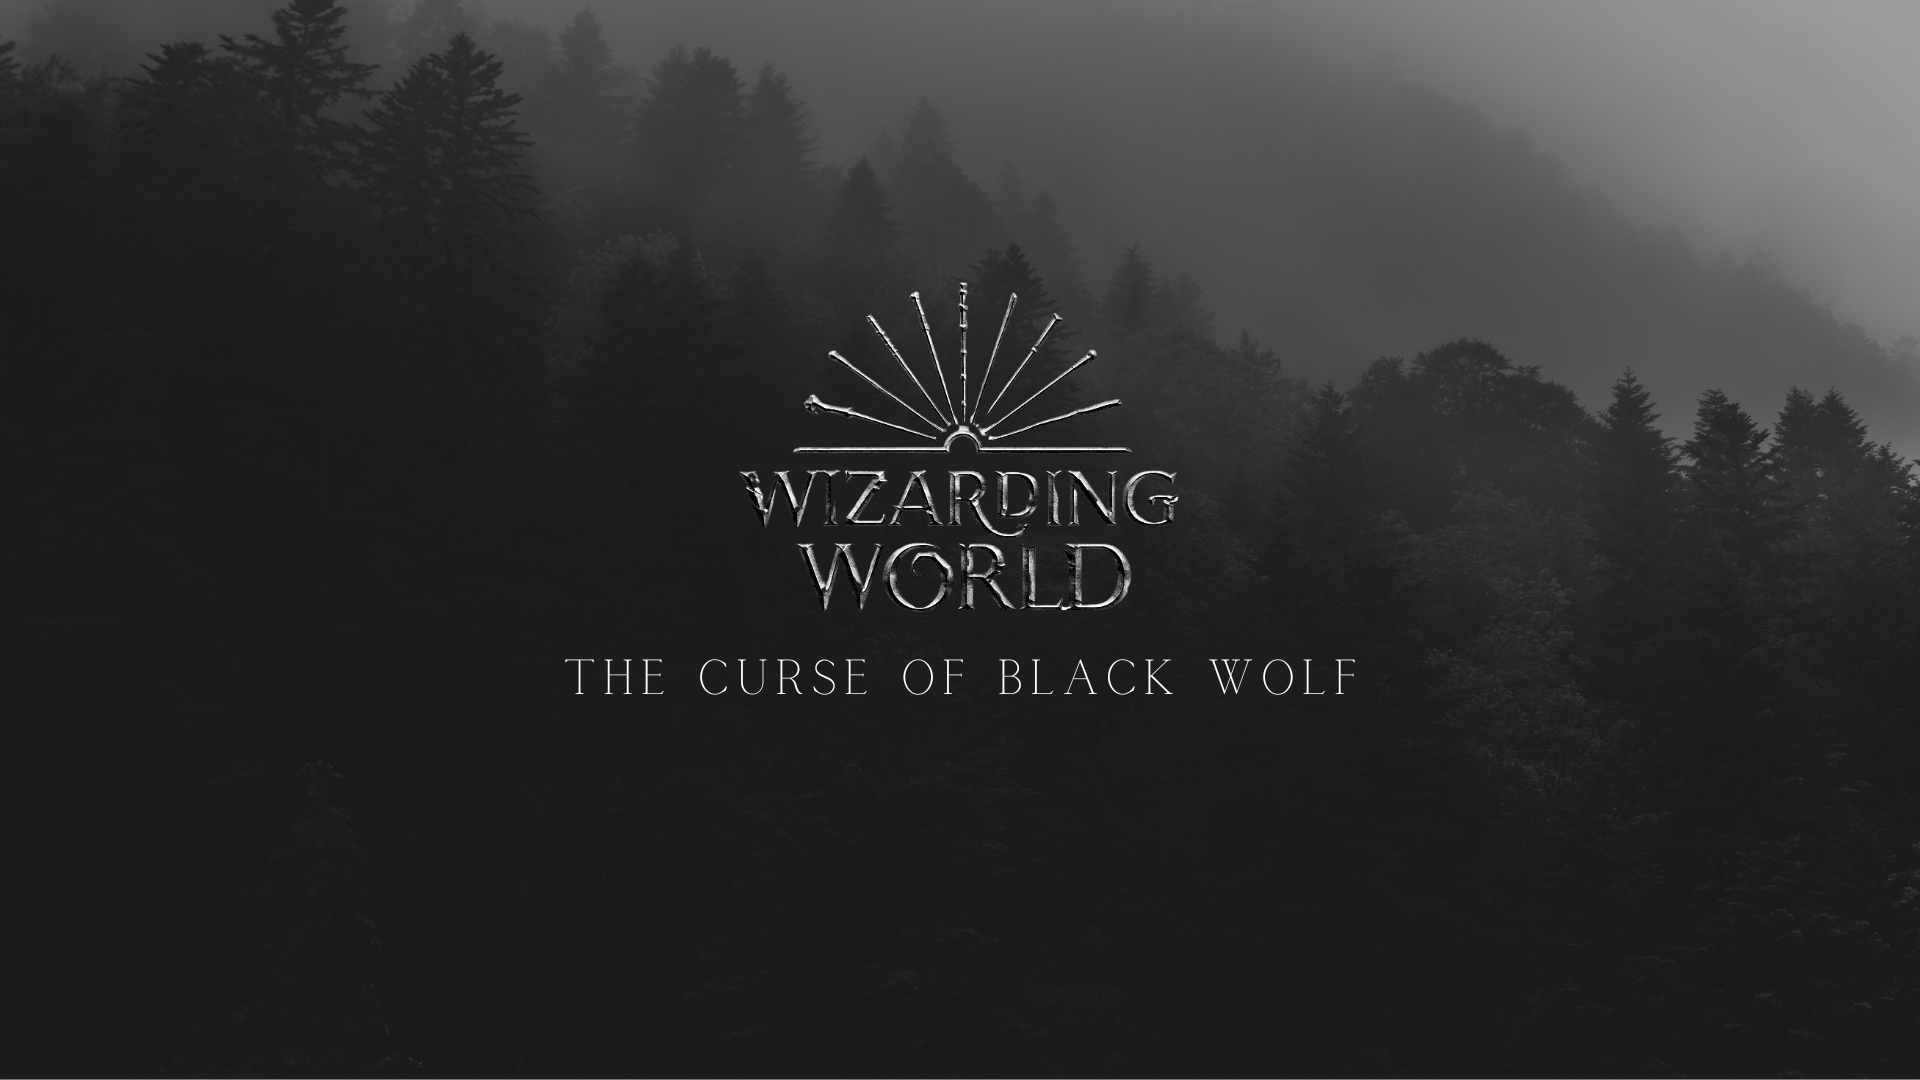 The Curse of Black Wolf